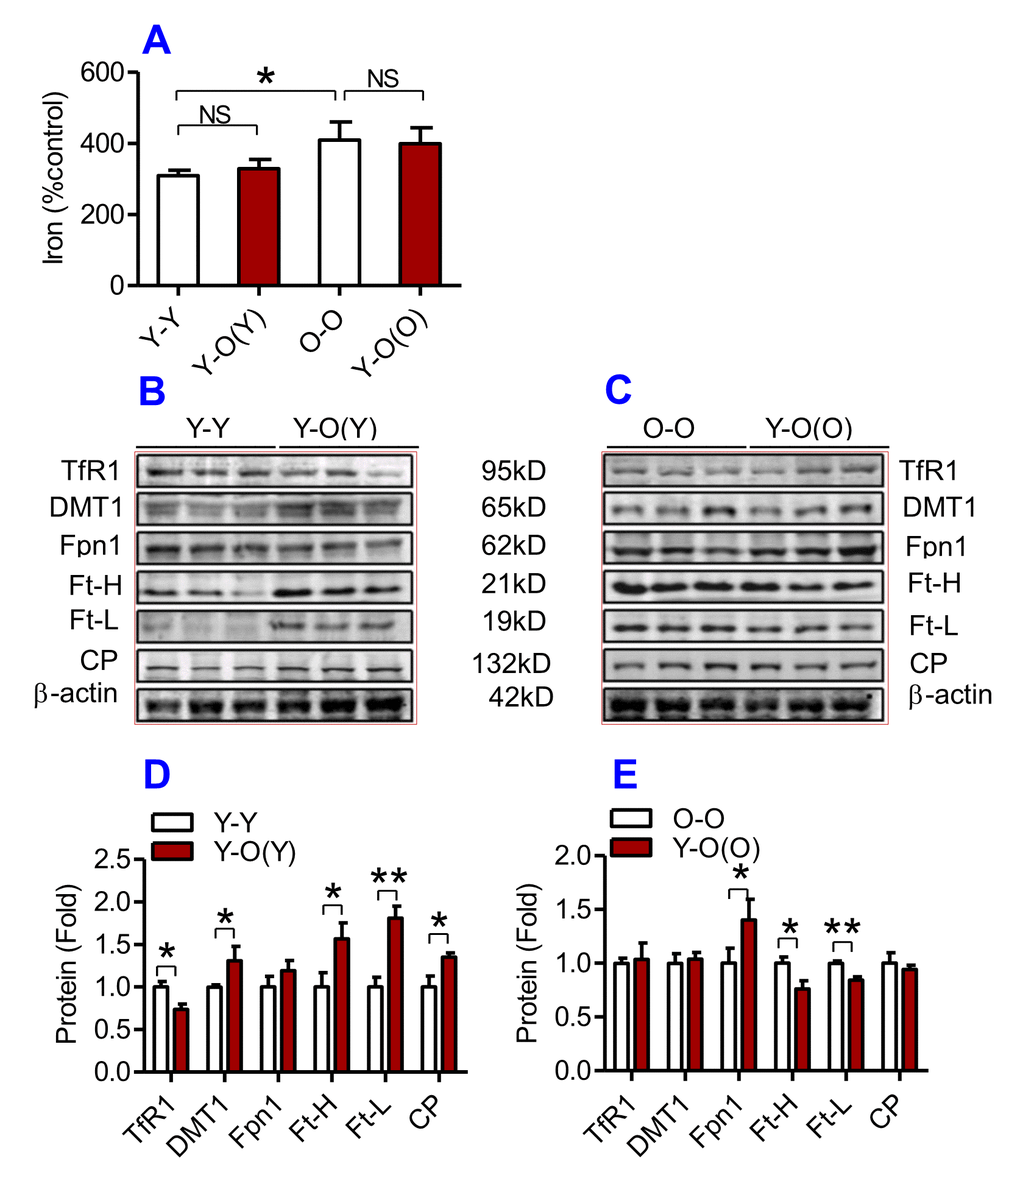 The effects of heterochronic parabiosis on the contents of iron and the expression of iron metabolism proteins in the heart of mice. The contents of iron (A), and the expression of TfR1, Fpn1, Ft-H, Ft-L and CP proteins (B – E) in the heart were determined in Y-Y, Y-O(Y), O-O and Y-O(O) mice using western blot analysis or the methods described previously. Data are presented as means ± SEM (n=4). *pp